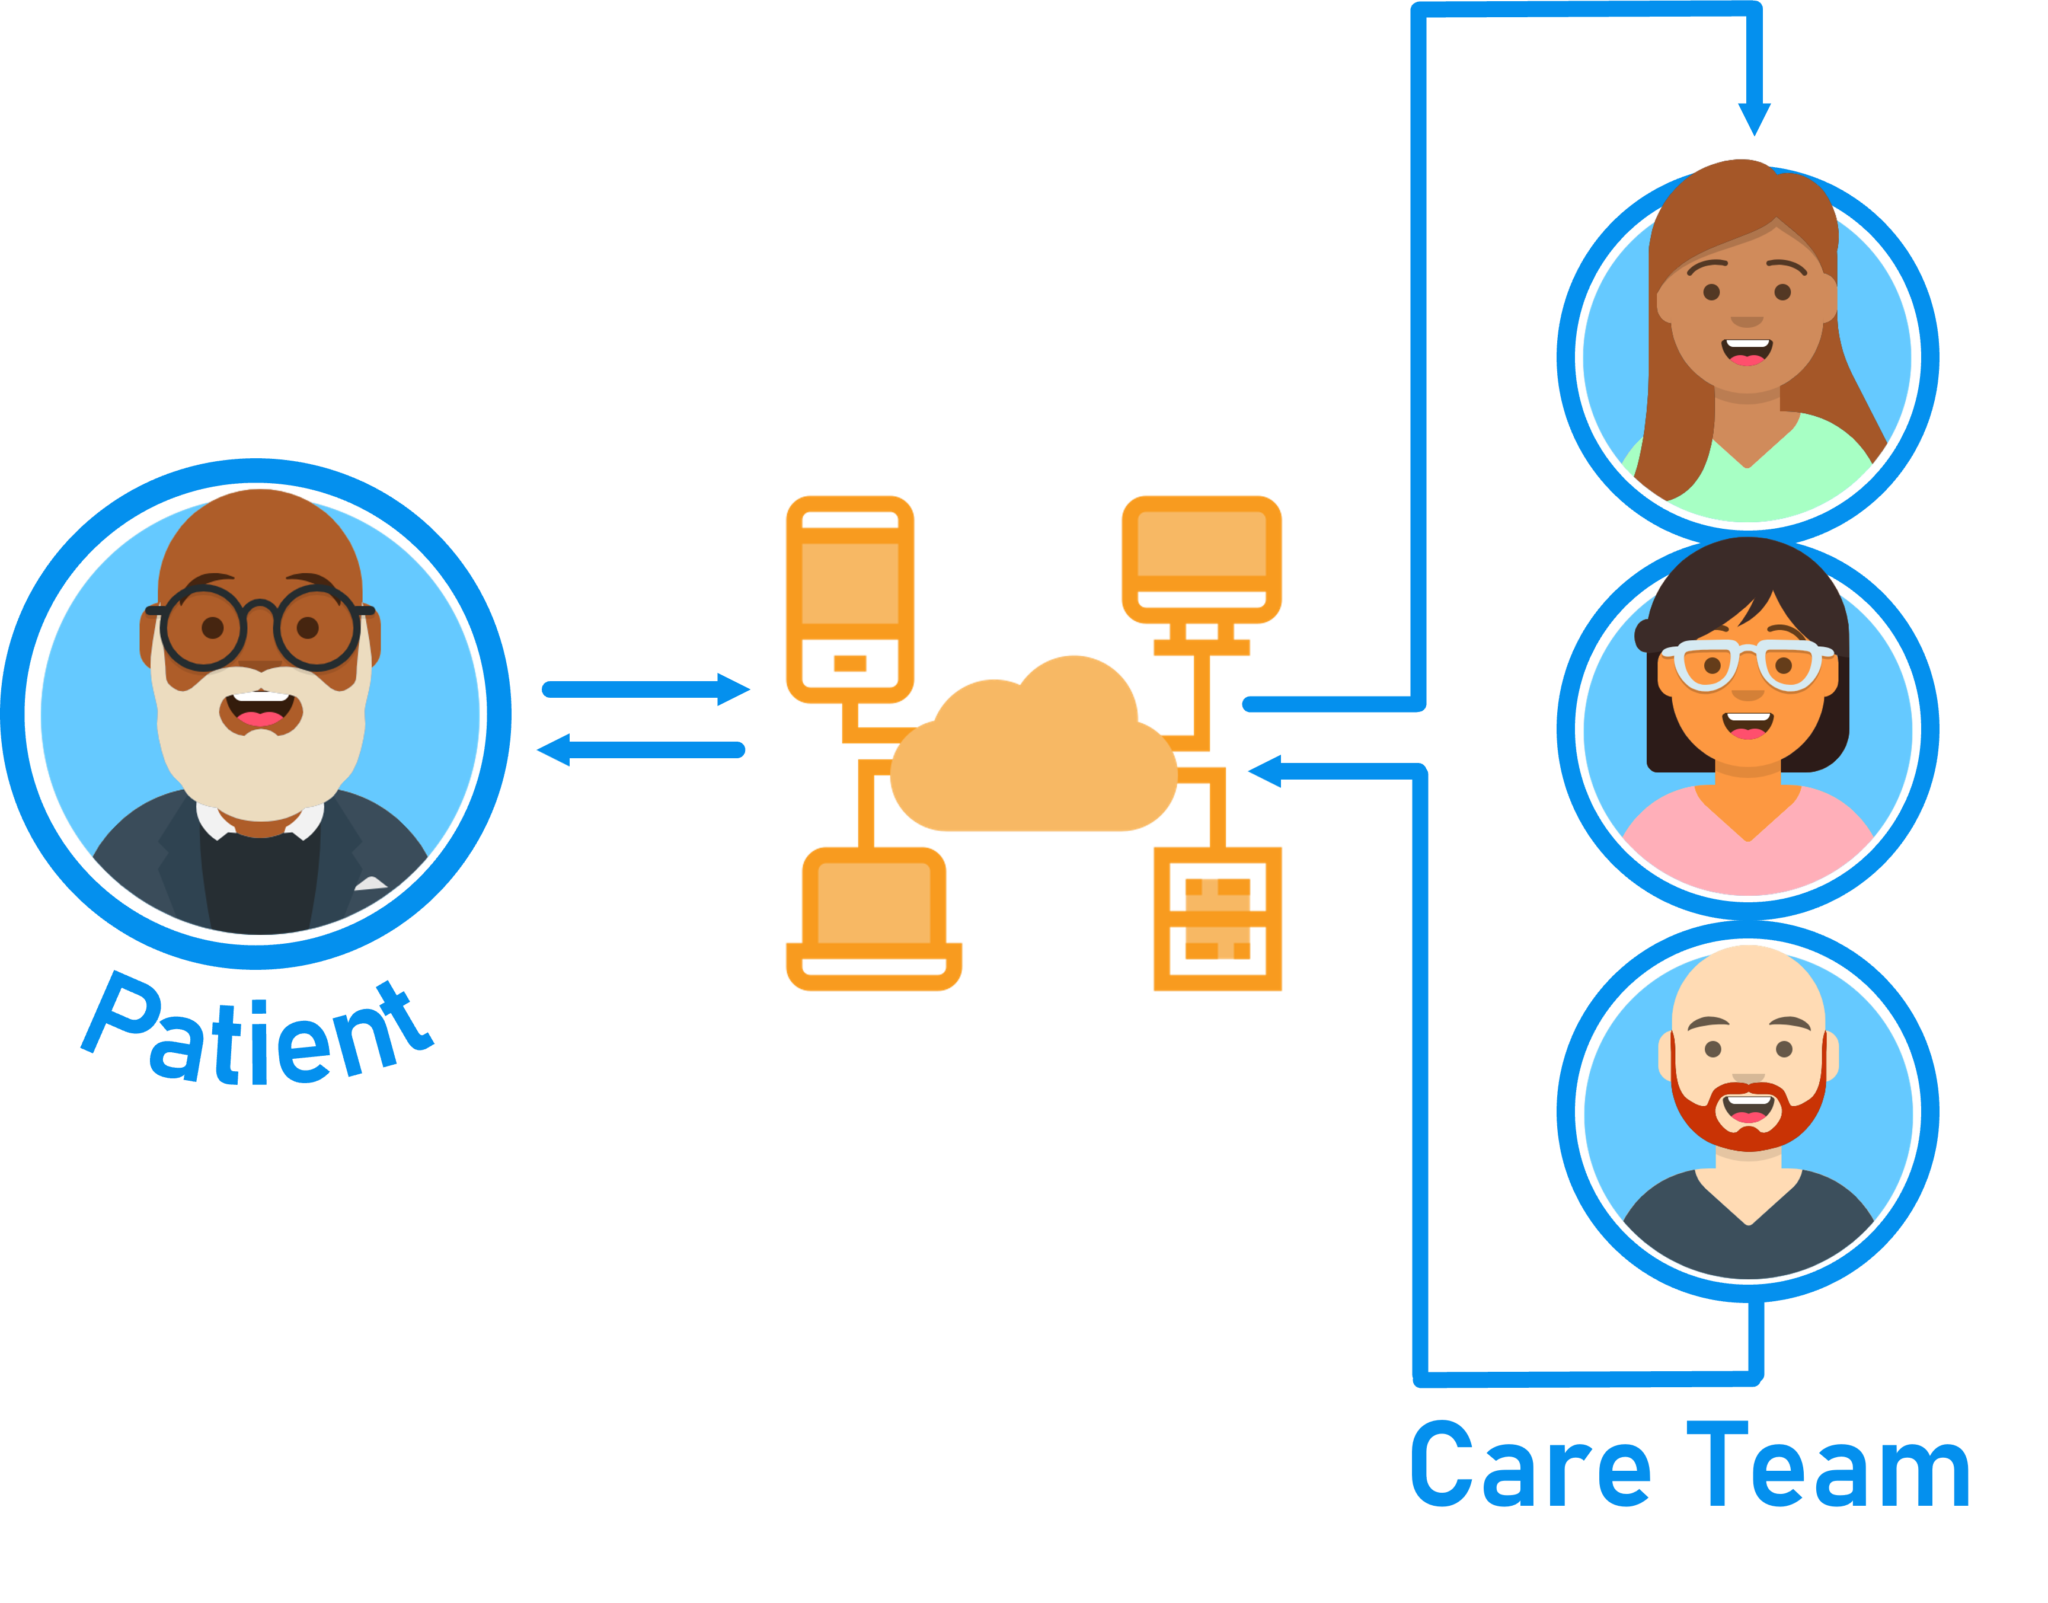 Patient and Care Team Health Providers Remote Patient Monitoring and Telehealth technology flow workflow 2/tecnologia esvyda - flujo de trabajo